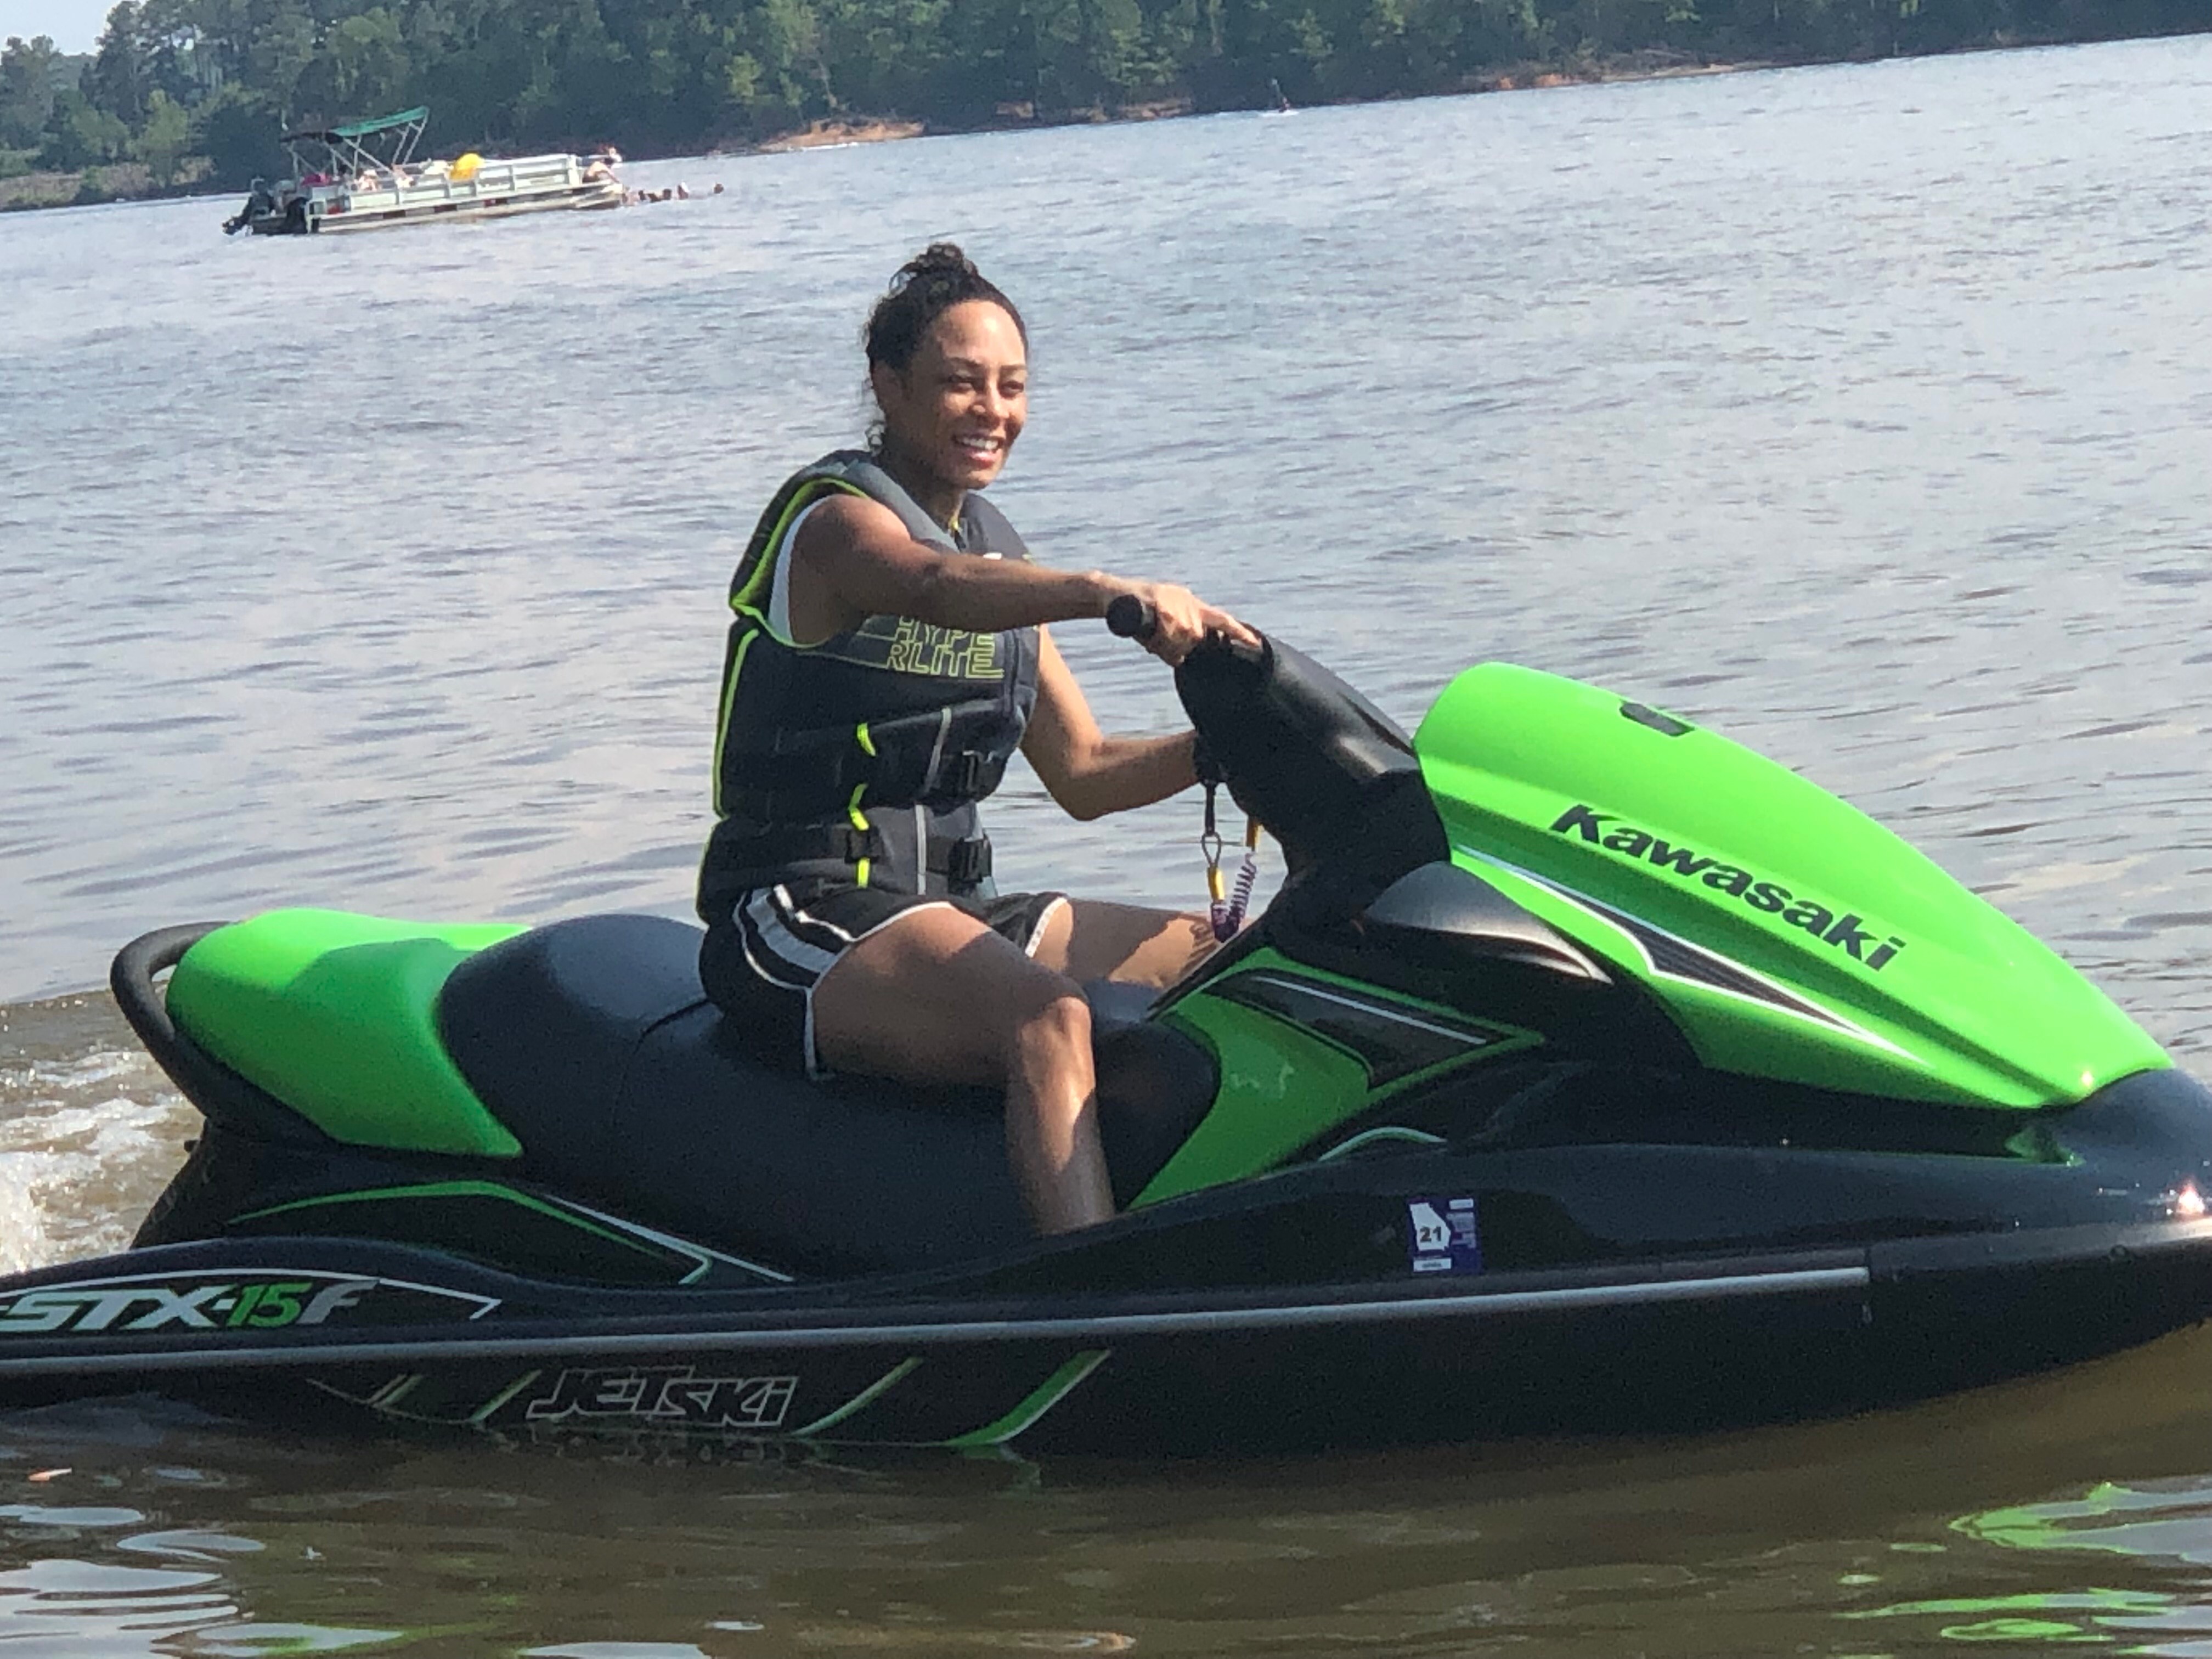 A woman is sitting on the water in her jet ski.